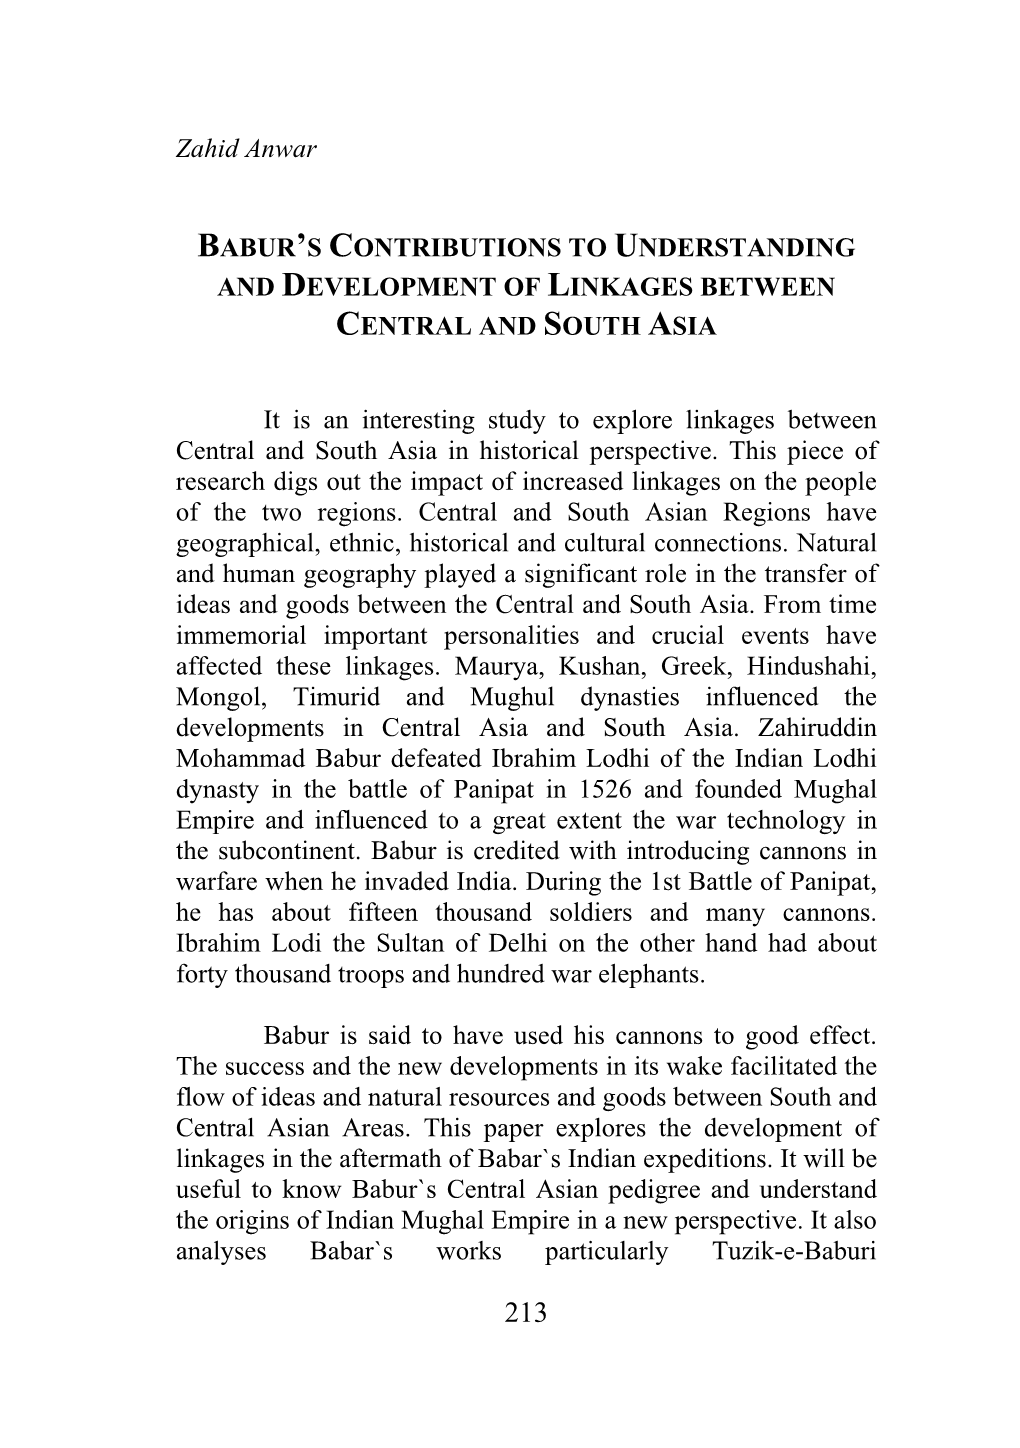 Babur`S Contributions to Understanding and Development of Linkages Between Central and South Asia